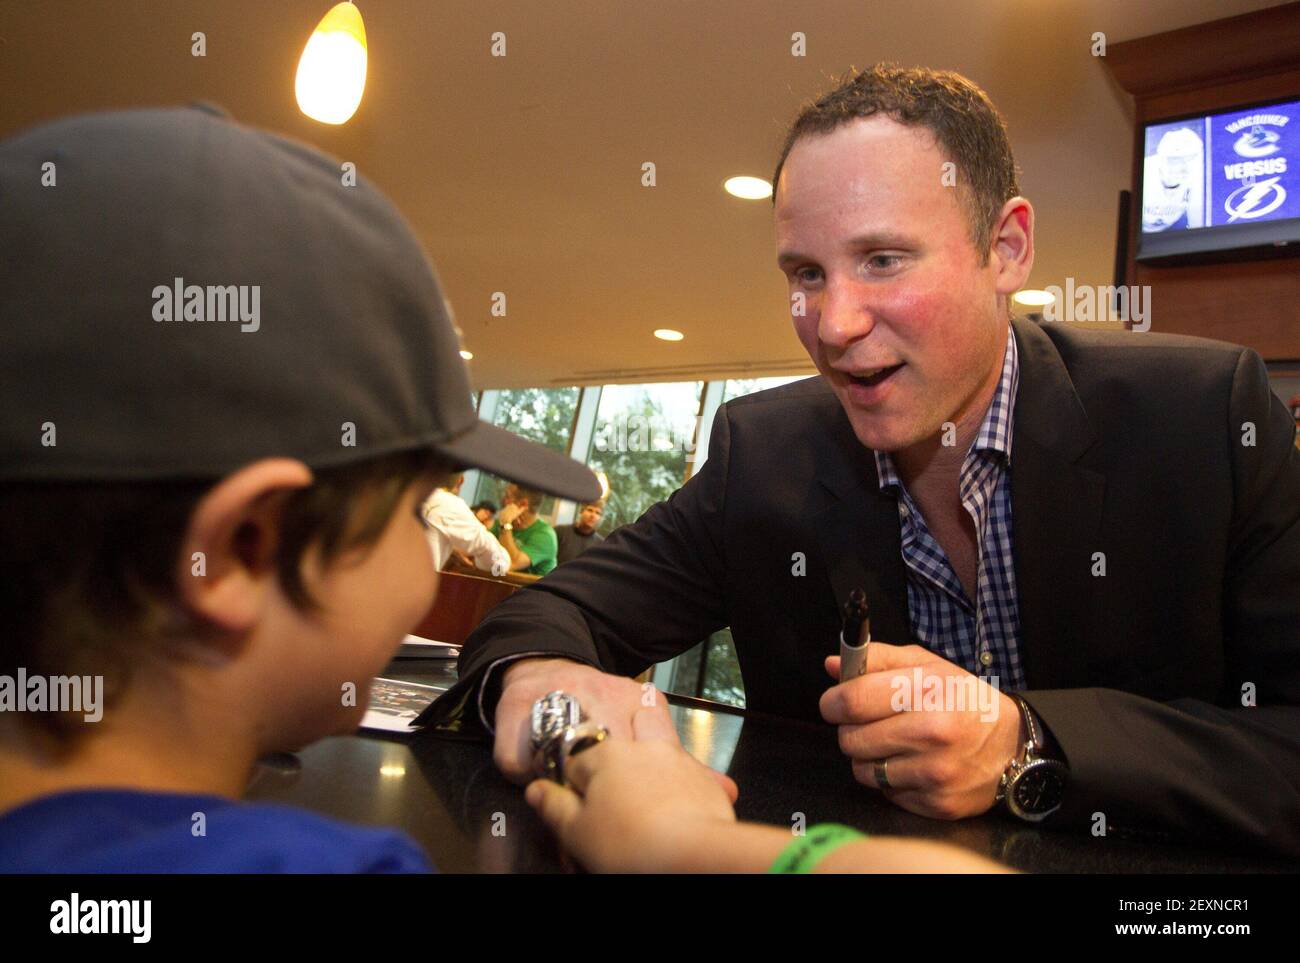 https://c8.alamy.com/comp/2EXNCR1/tampa-bay-lightning-stanley-cup-winner-nolan-pratt-compares-his-championship-ring-with-the-replica-stanley-cup-ring-worn-by-nathan-feltmate-10-at-the-tampa-bay-times-forum-in-tampa-fla-on-monday-march-17-2014-the-tampa-bay-lightning-faced-the-vancouver-canucks-photo-by-dirk-shaddtampa-bay-timesmctsipa-usa-2EXNCR1.jpg